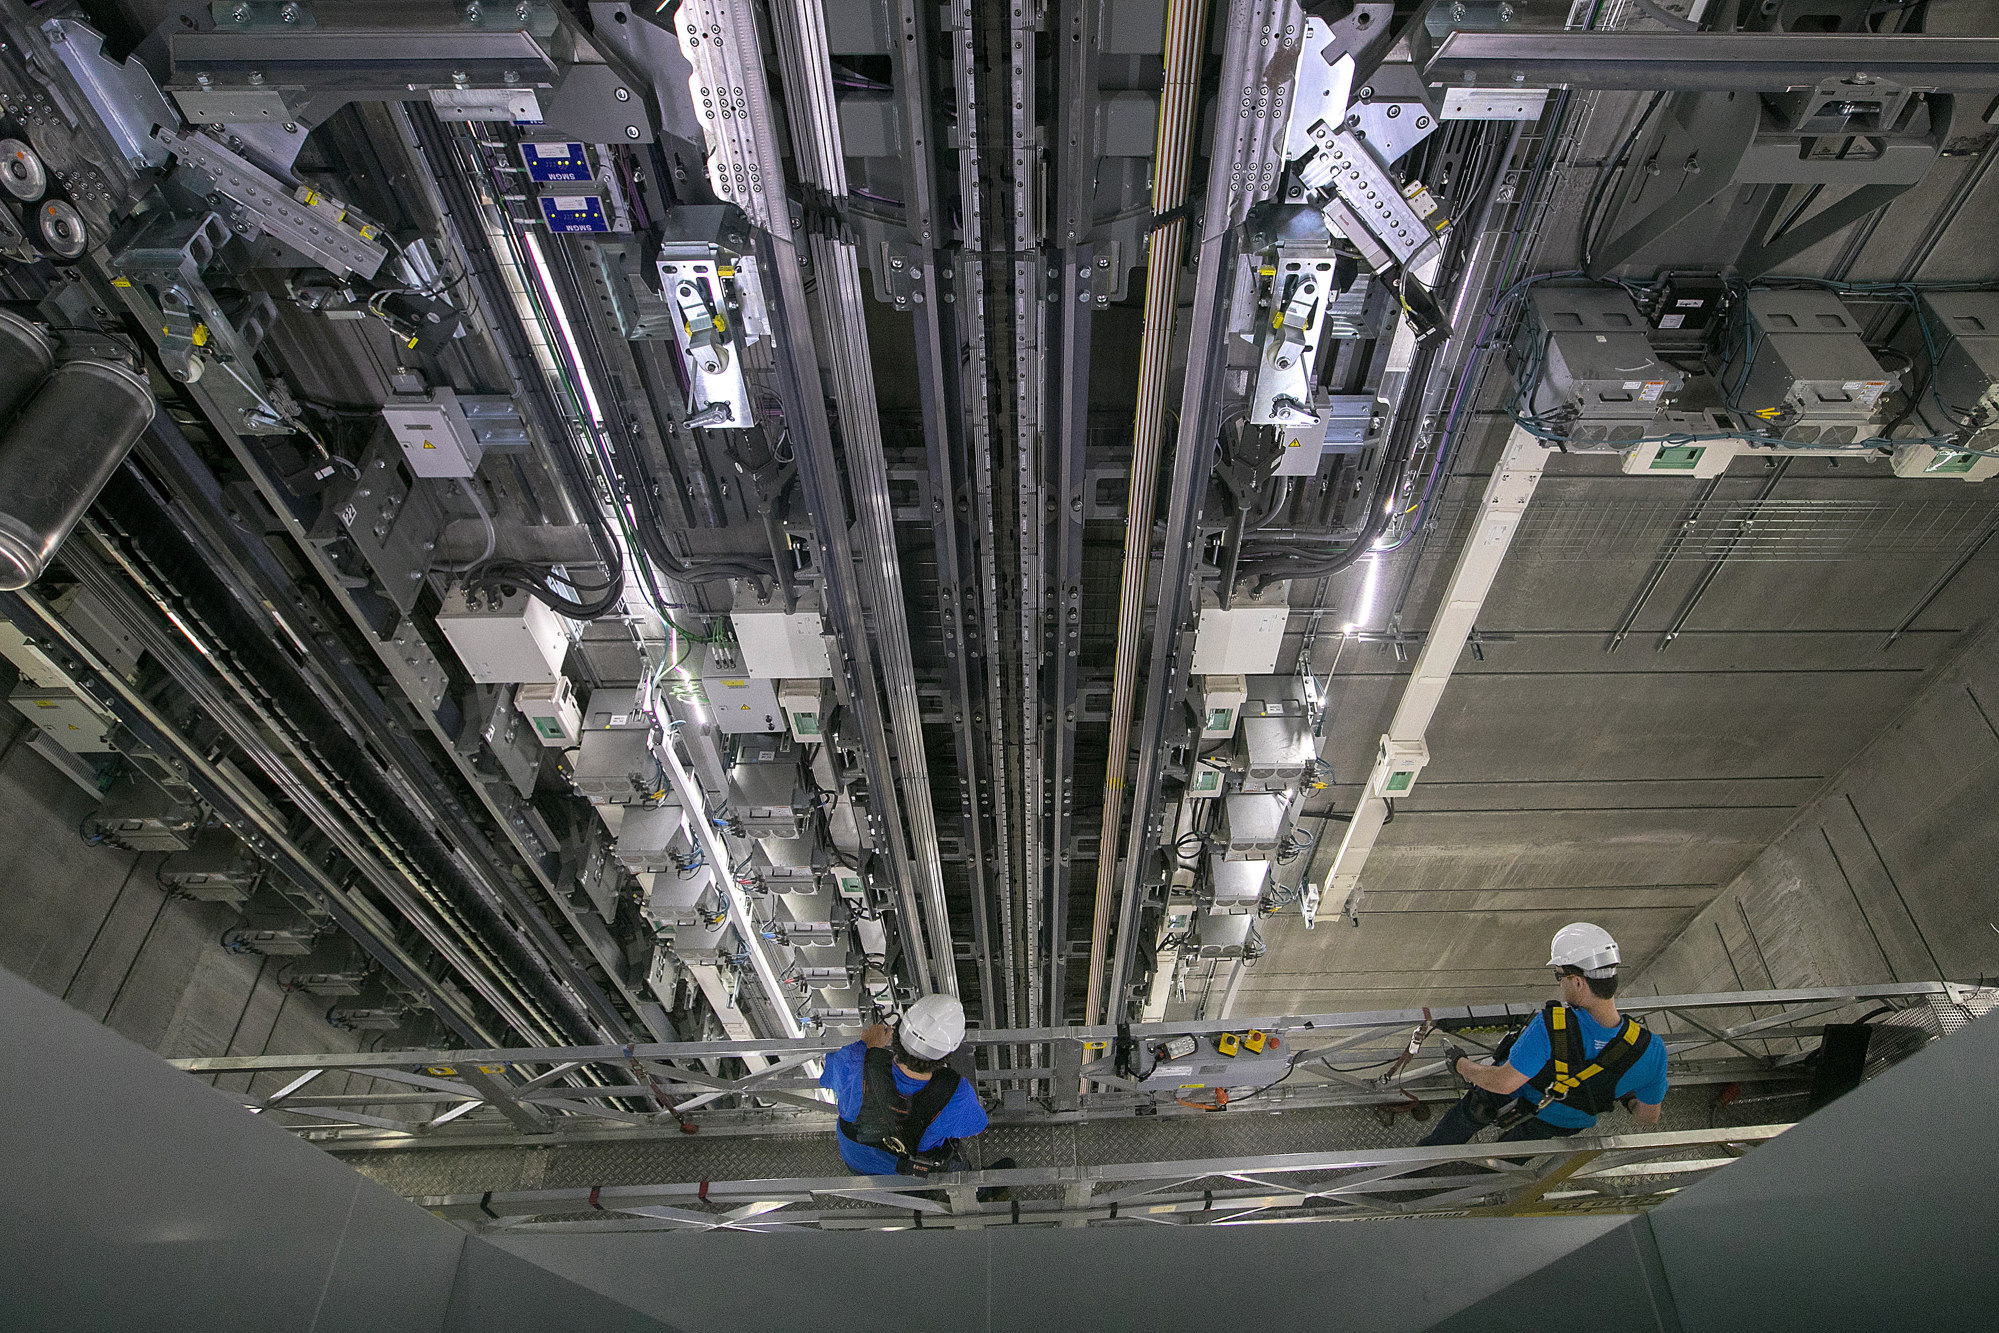 Engineers carry out maintenance work inside the Multi system elevator shaft, which enables vertical and horizontal movement, inside the Thyssenkrupp Elevator AG test tower in Rottweill.